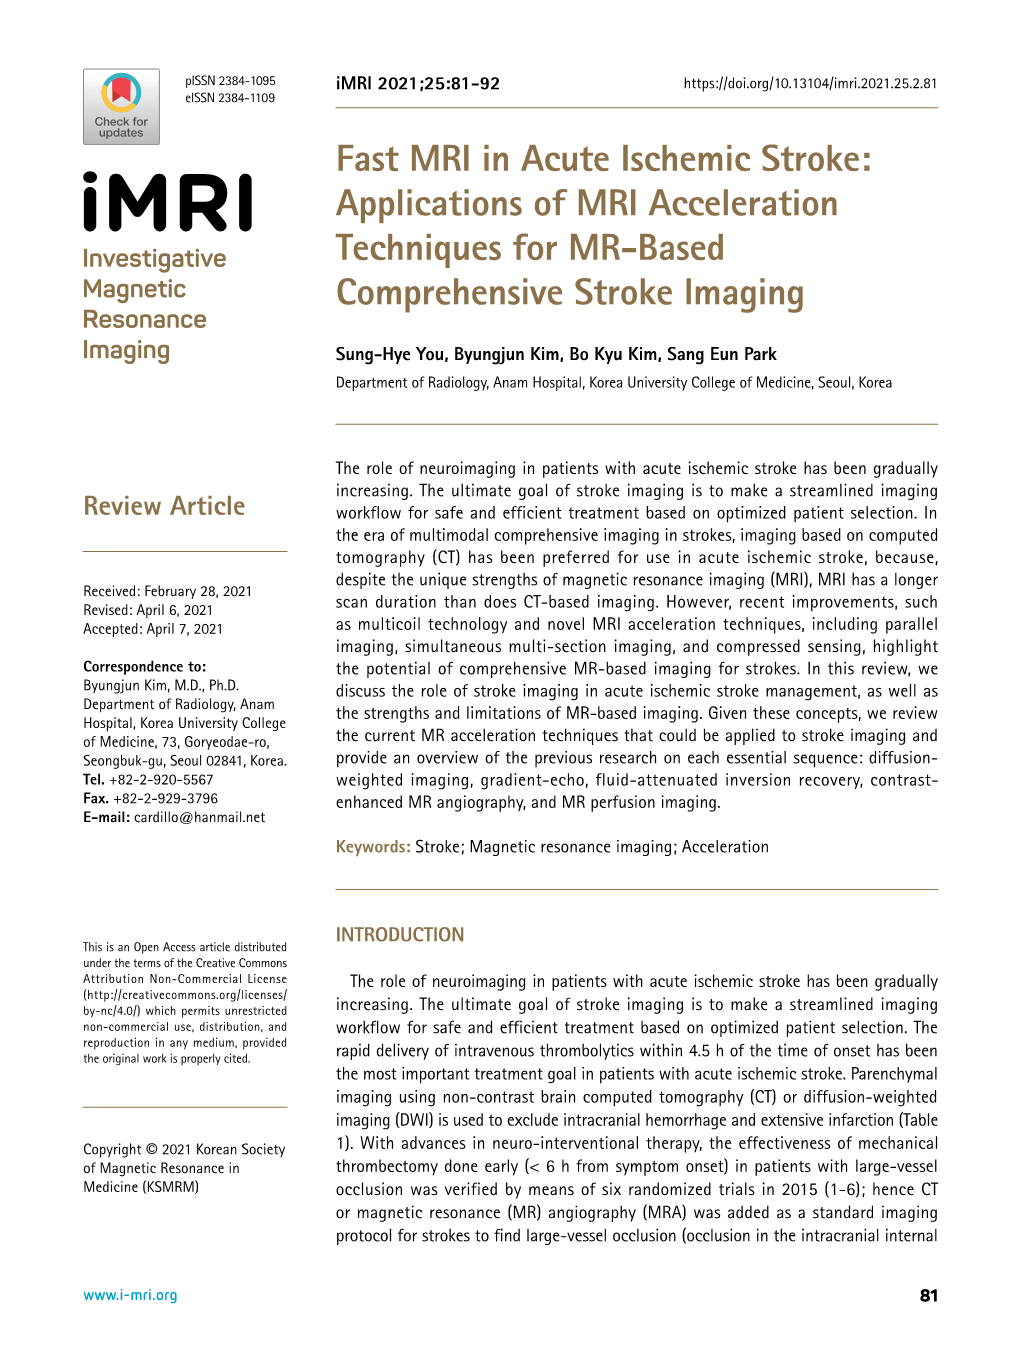 Fast MRI in Acute Ischemic Stroke: Applications of MRI Acceleration Techniques for MR-Based Comprehensive Stroke Imaging